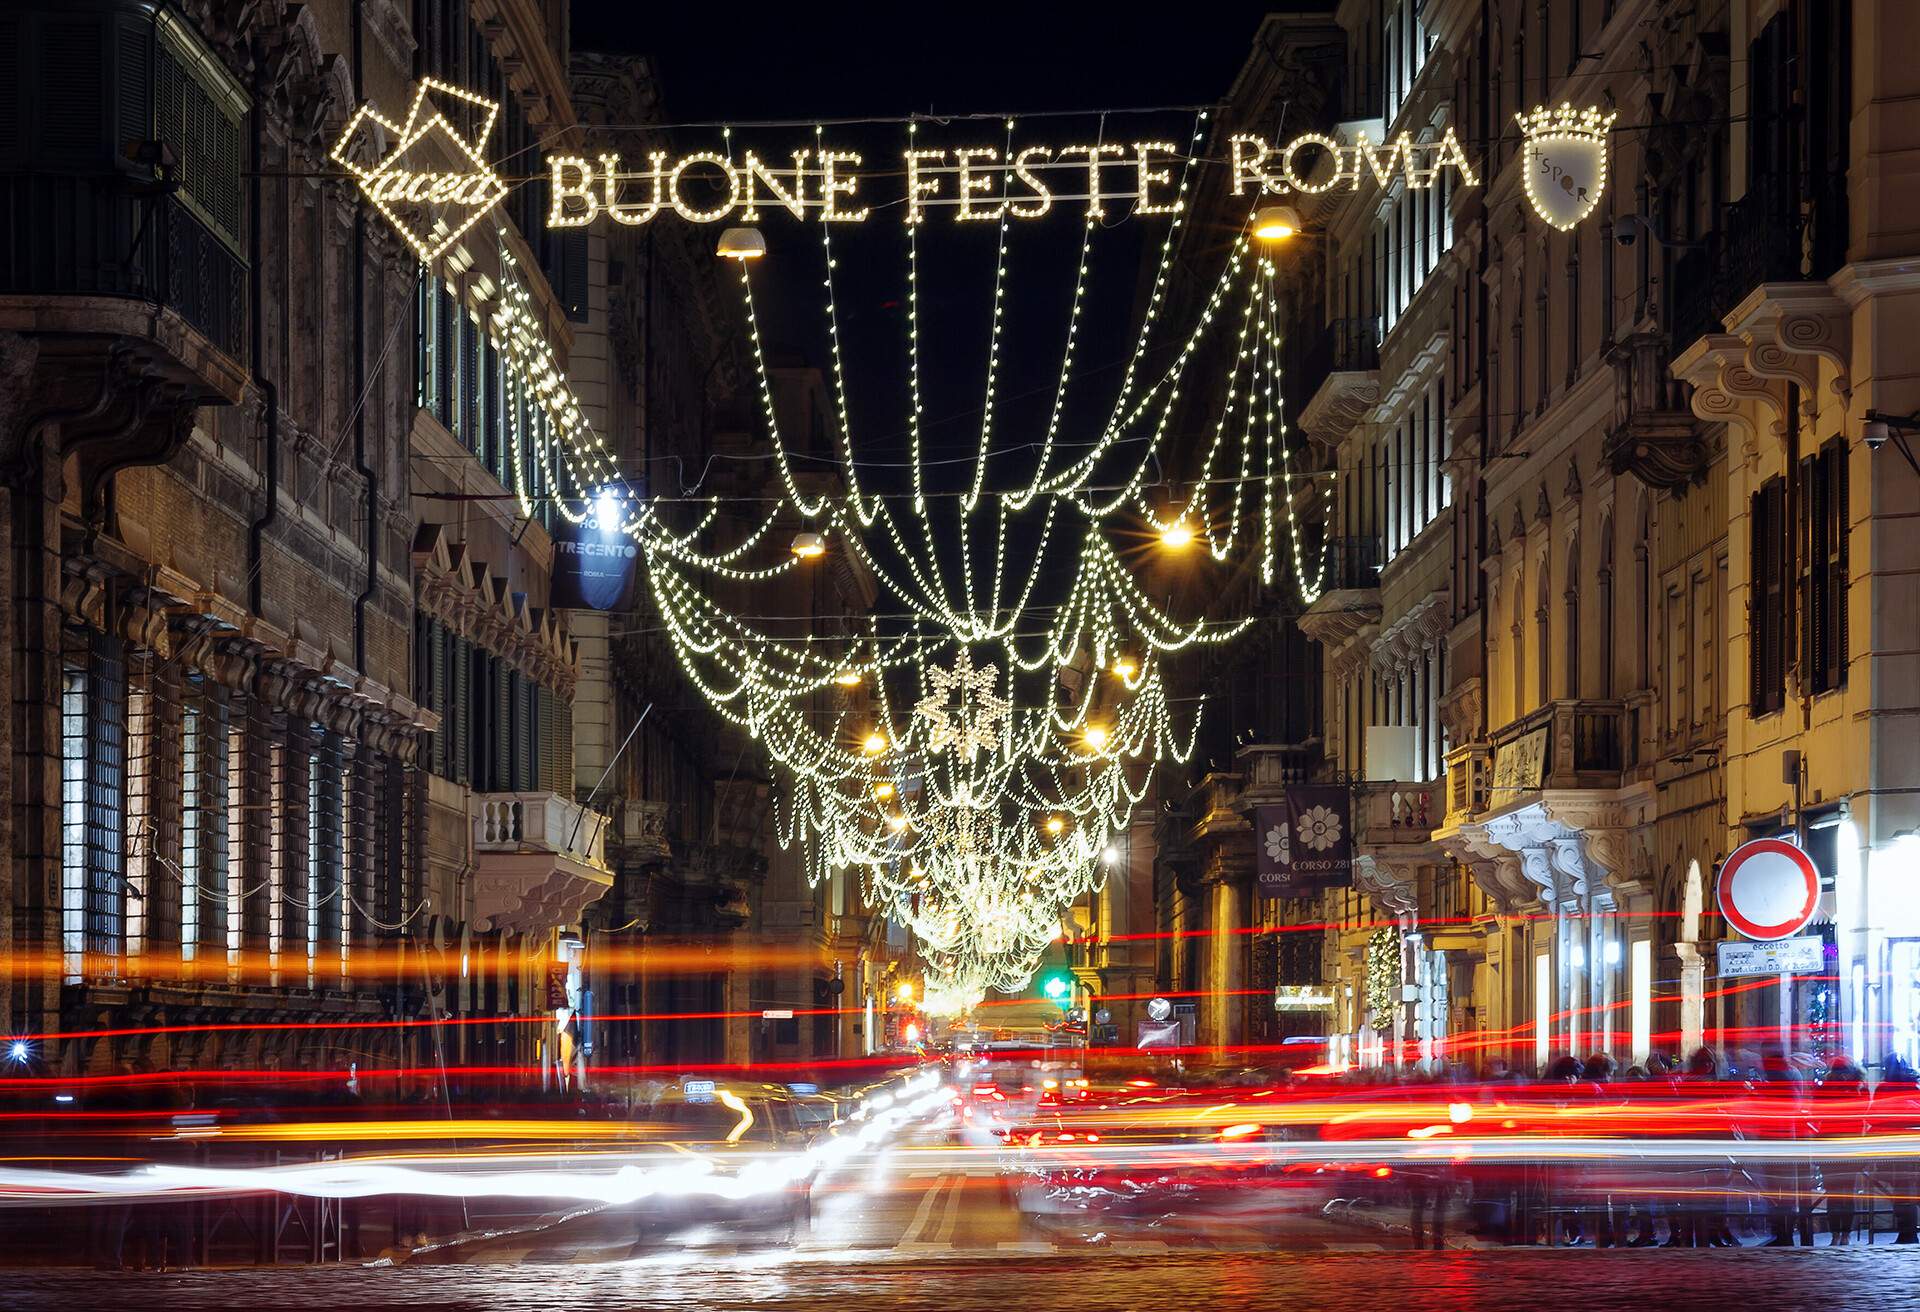 Rome, Via del Corso lit with LED lights and a text wishing you a Merry Christmas